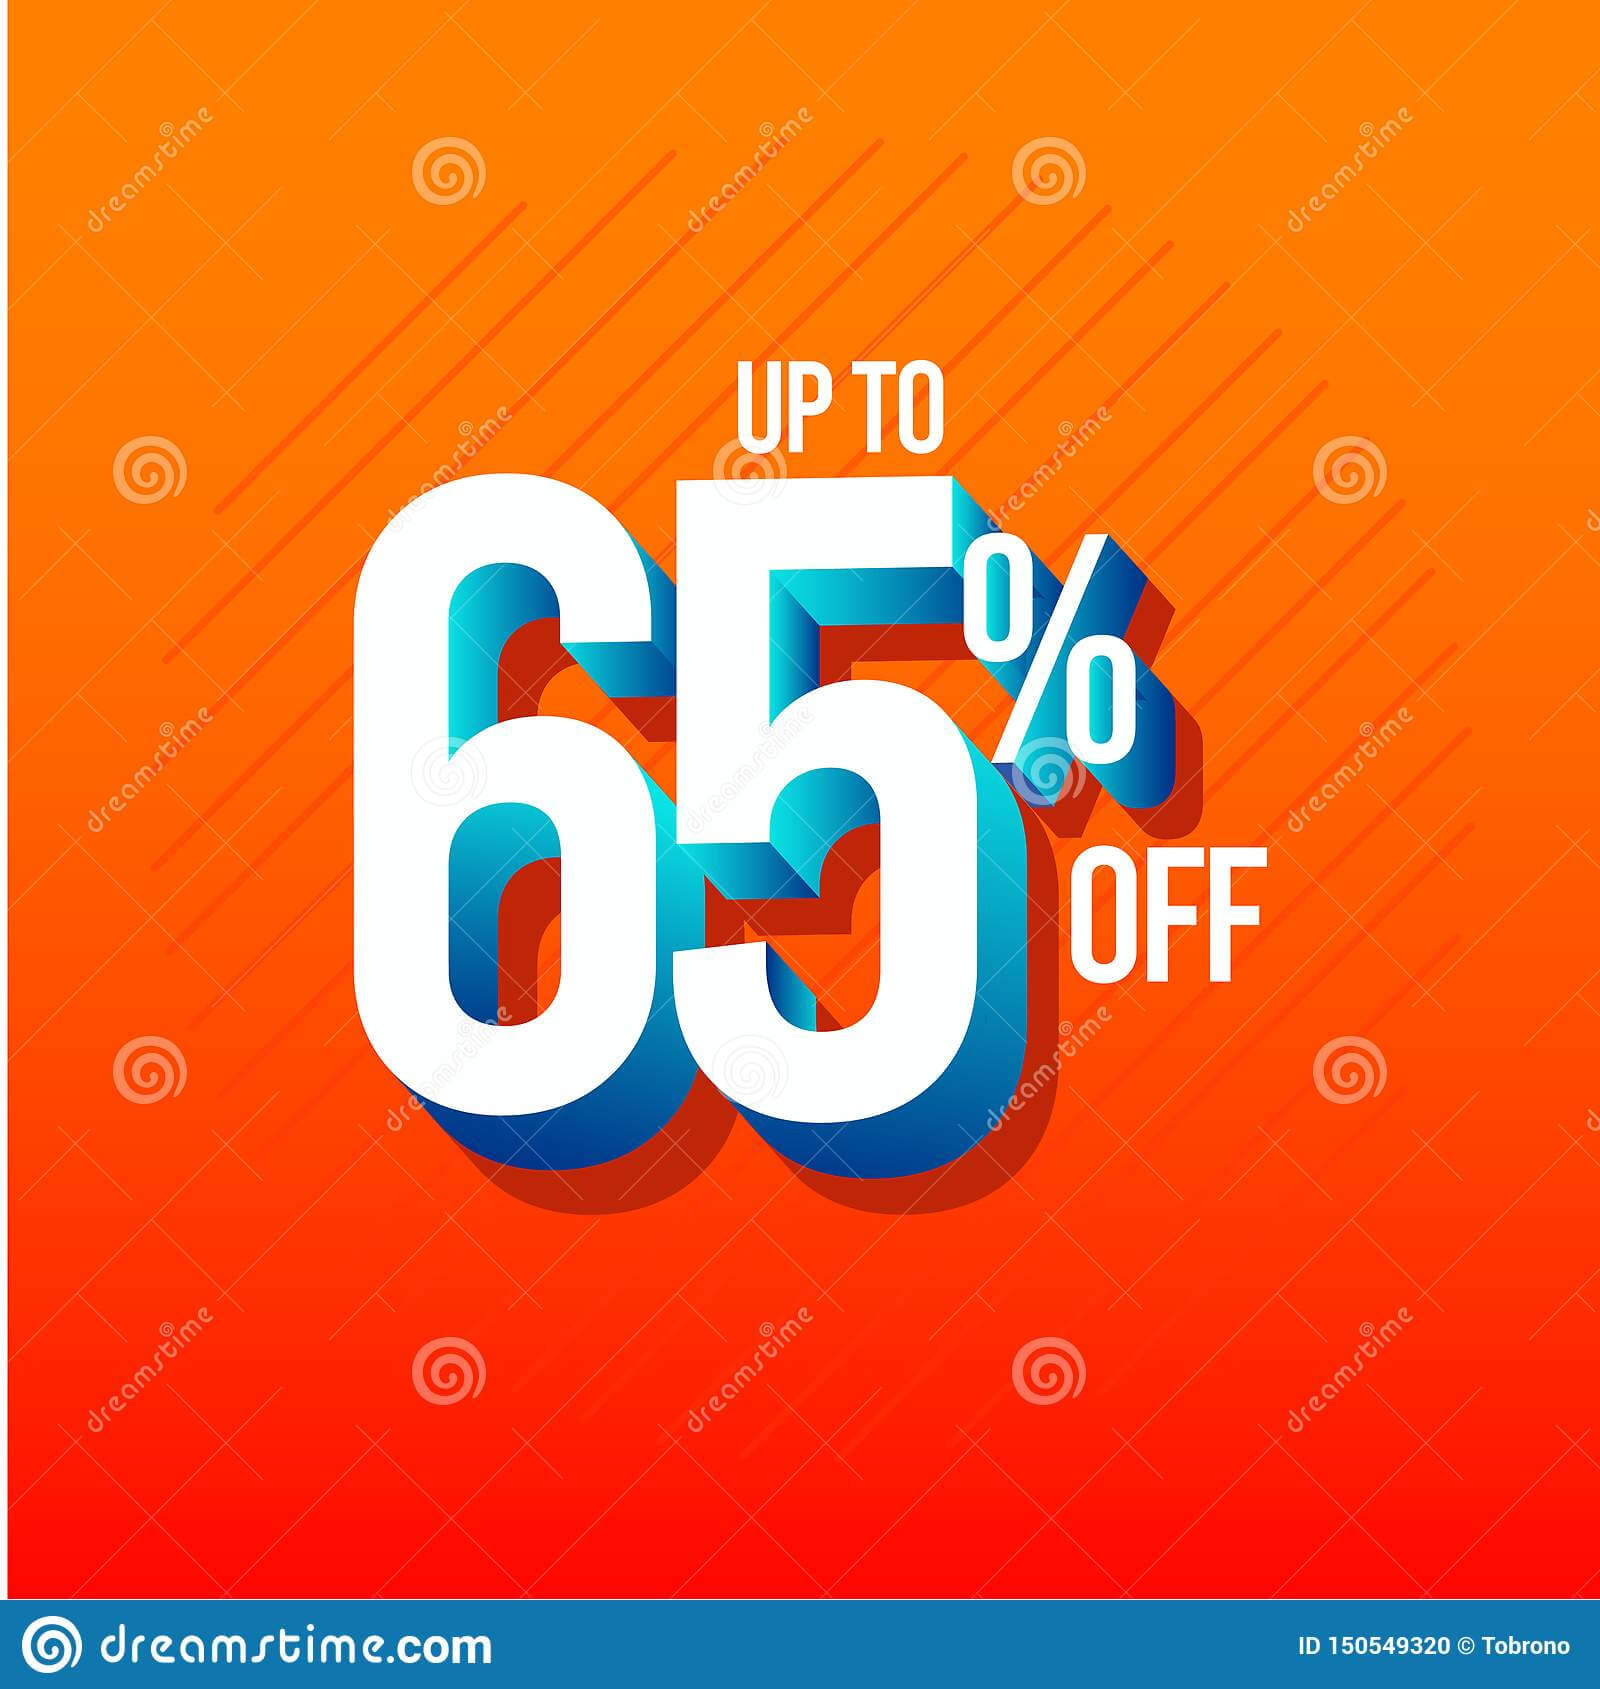 Discount Up To 65% Off Label Vector Template Design For 65 Label Template